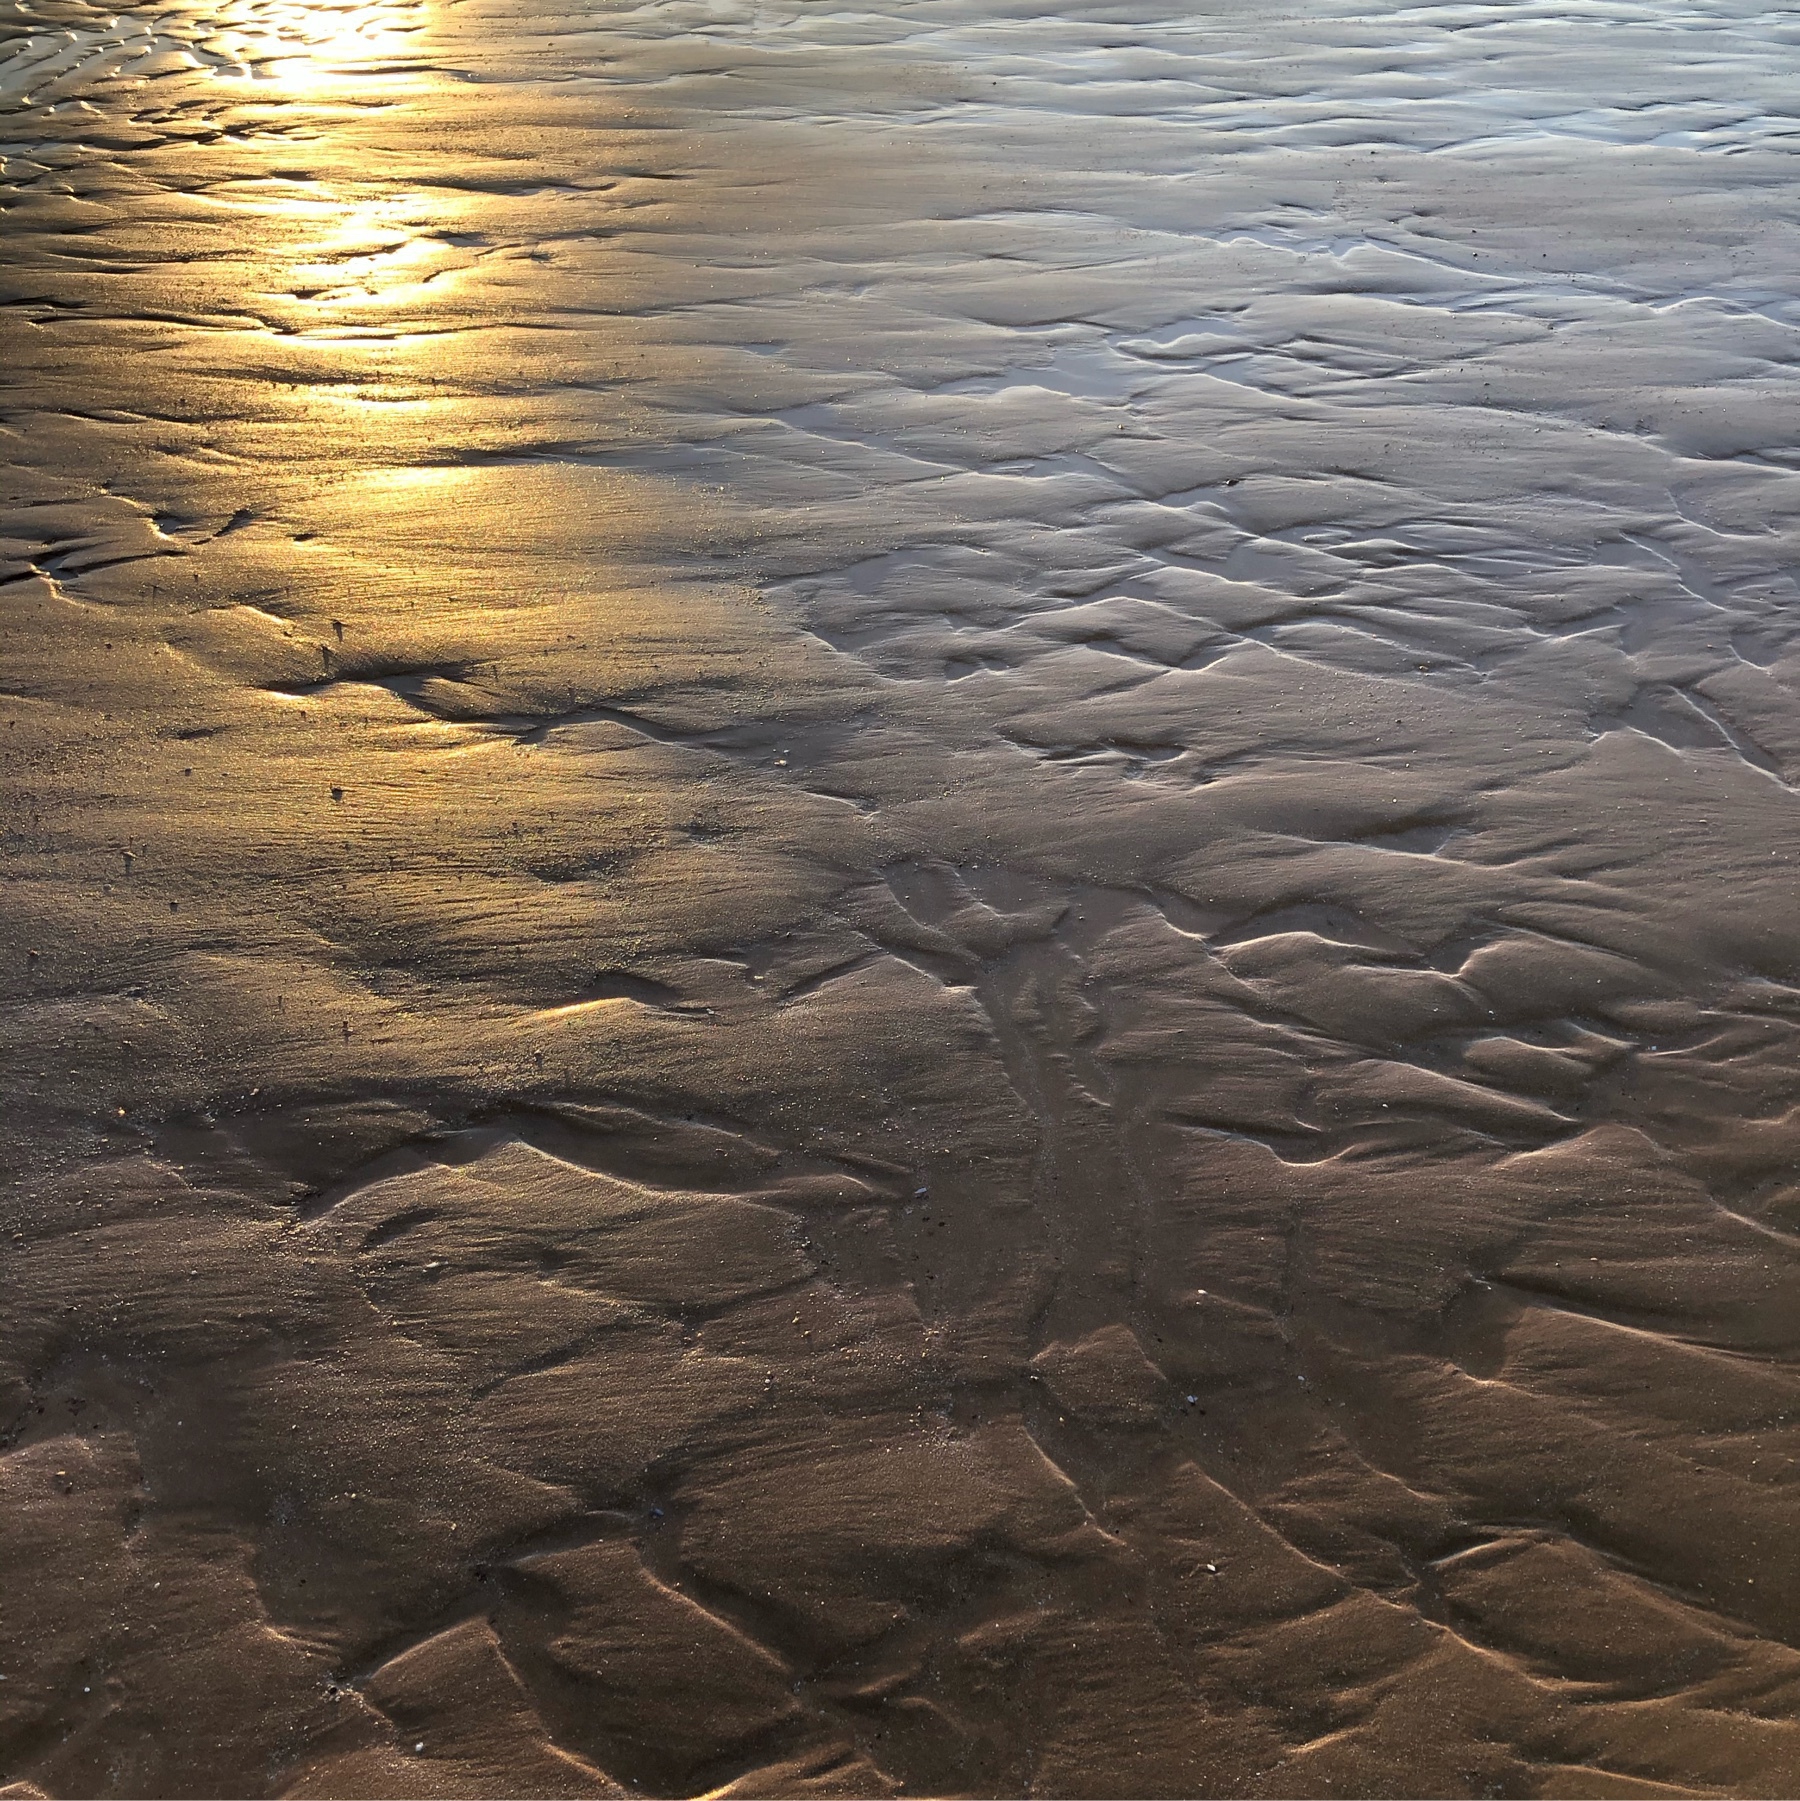 reflection of the sun on the sand